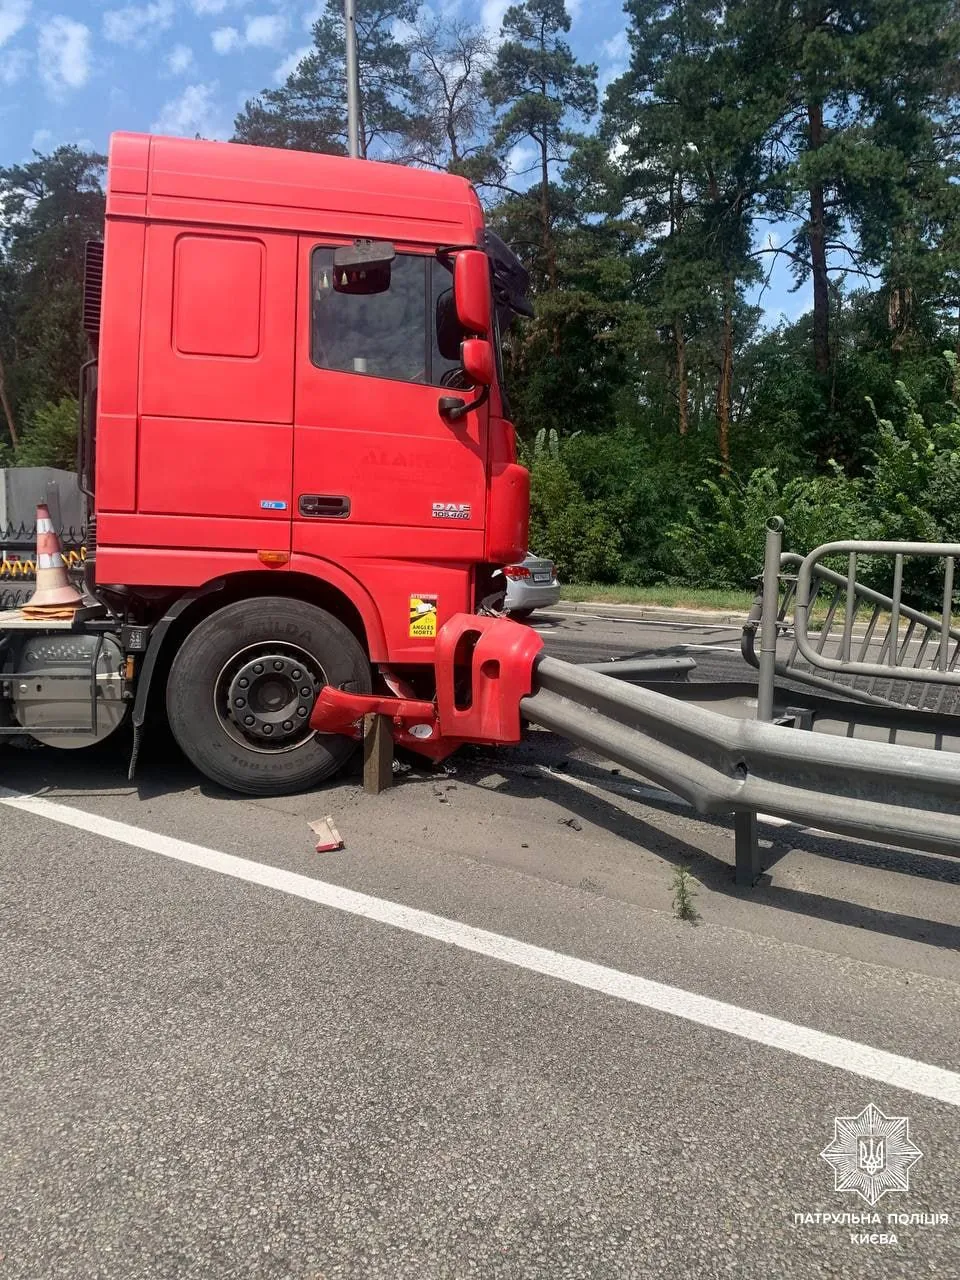 In Kyiv, an accident with a truck disrupts traffic towards the Zhytomyrska metro station